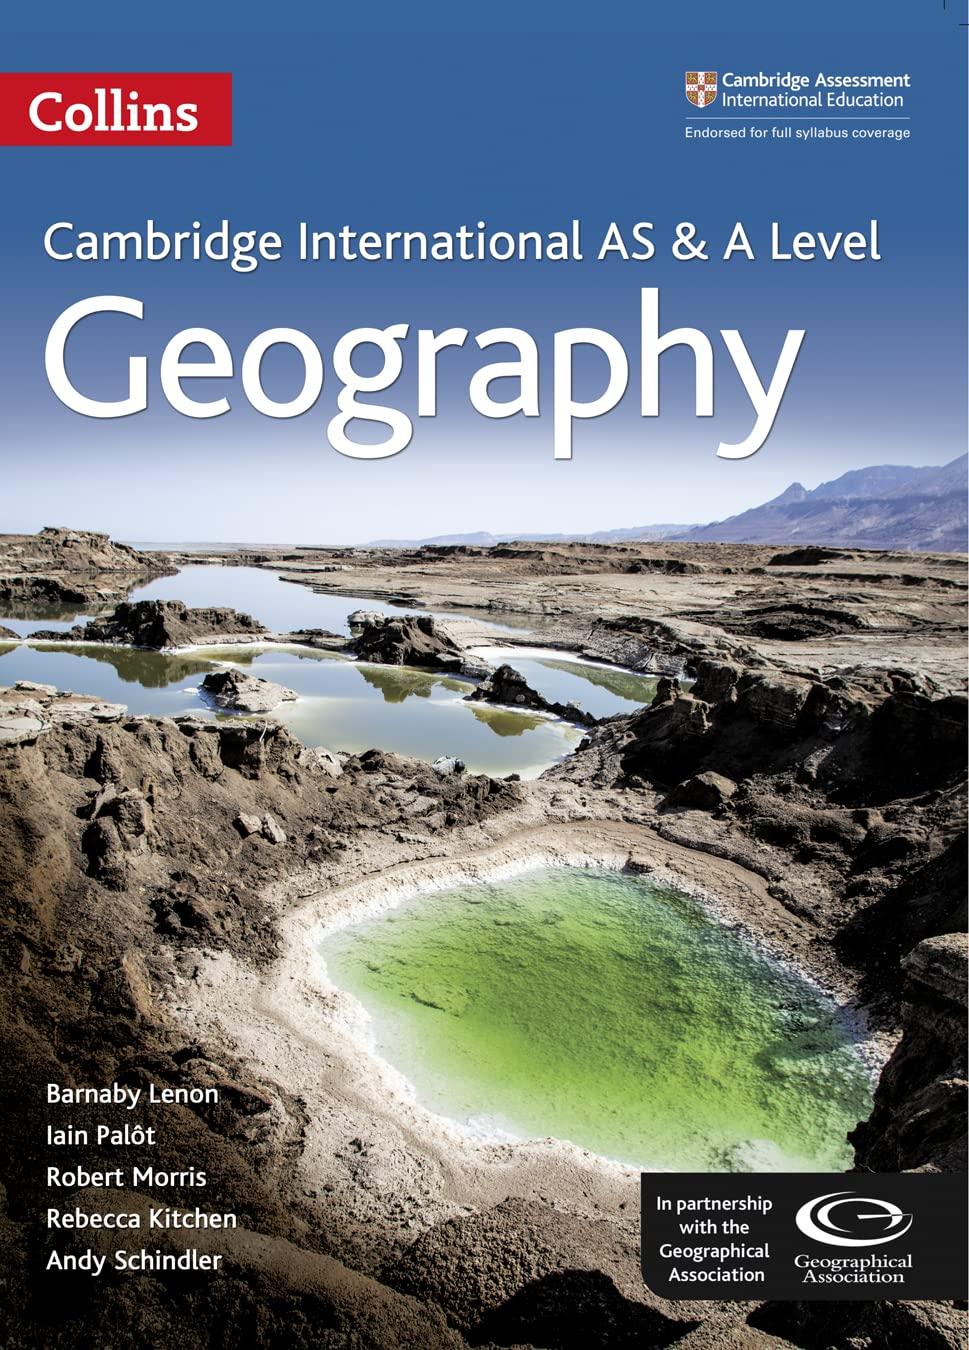 collins cambridge international as and a level geography 1st edition barnaby lenon, rebecca kitchen, andy